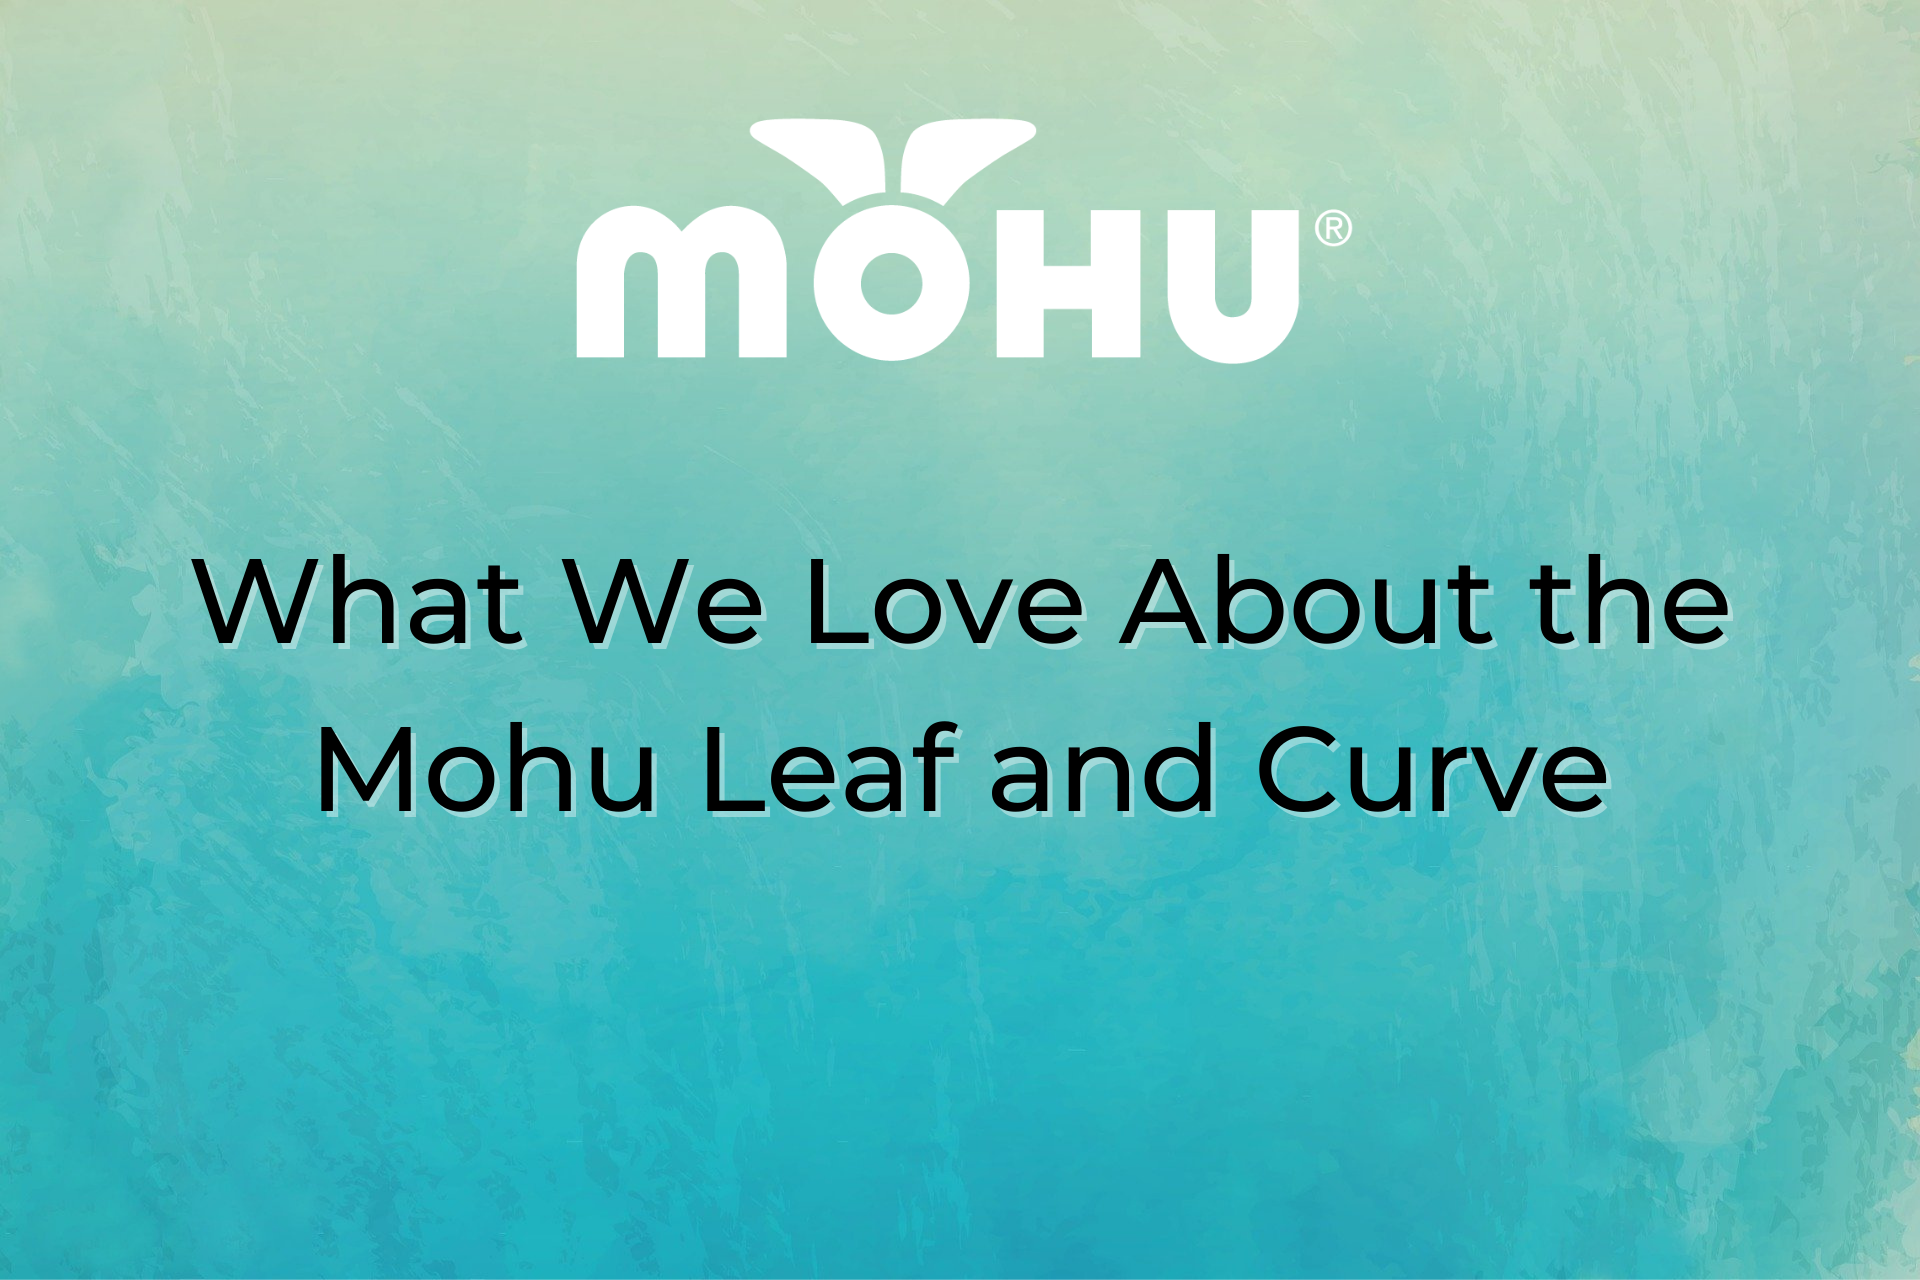 What We Love About the Mohu Leaf and Curve